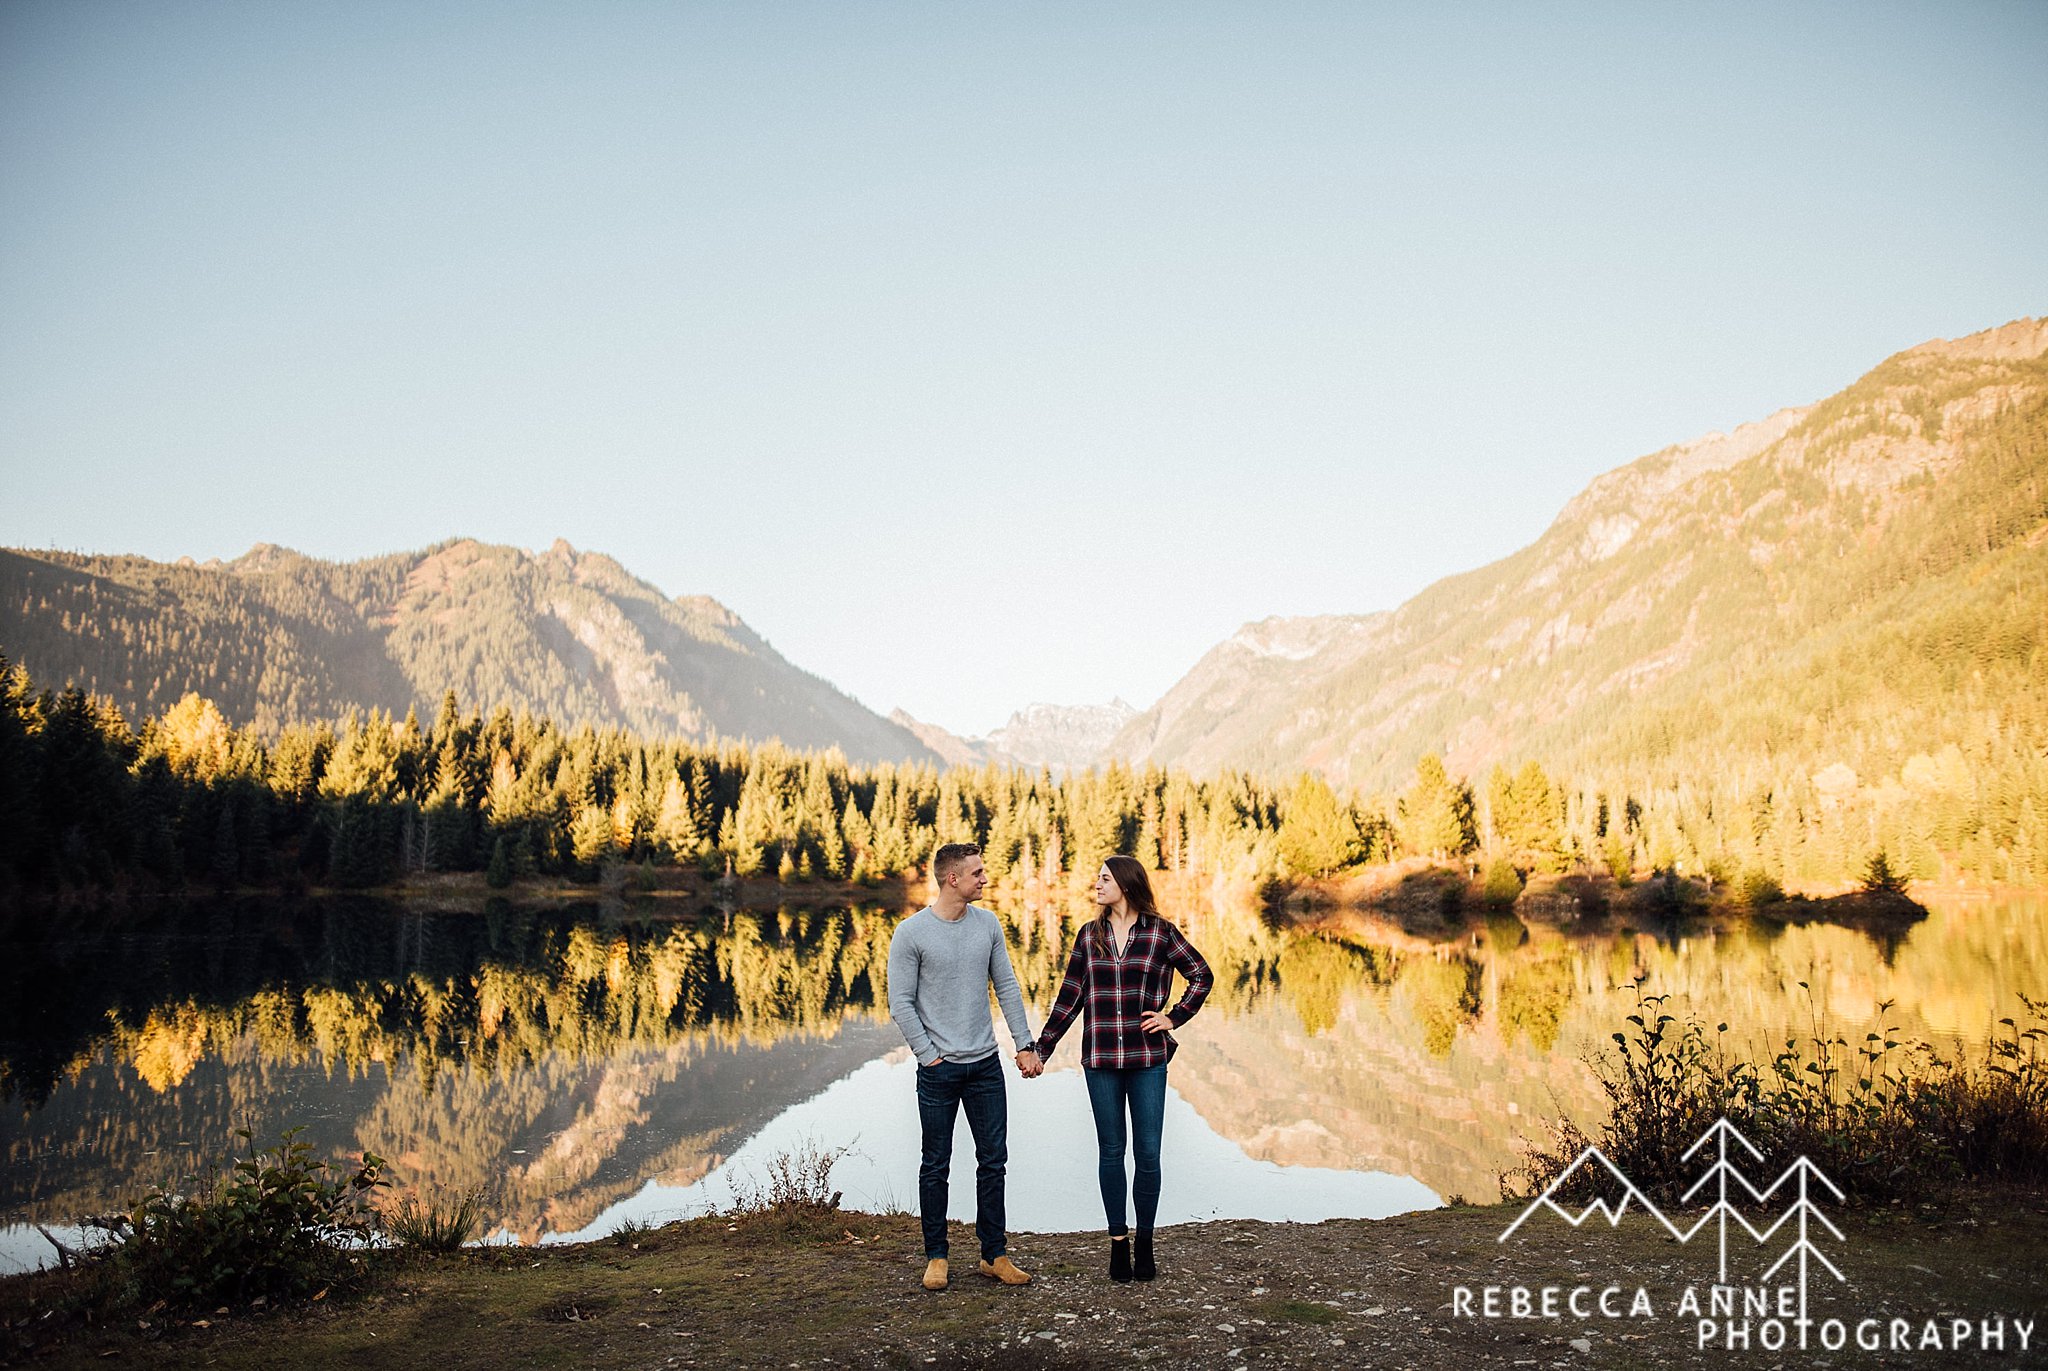 Gold Creek Pond Engagement,Snoqualmie Pass Engagement,North Bend Engagement,Seattle engagement photographer,Seattle engagement Photography,washington engagement photographer,pacific northwest engagement photographer,tacoma engagement photographer,tacoma engagement photography,washington engagement photography,pacific northwest engagement photography,